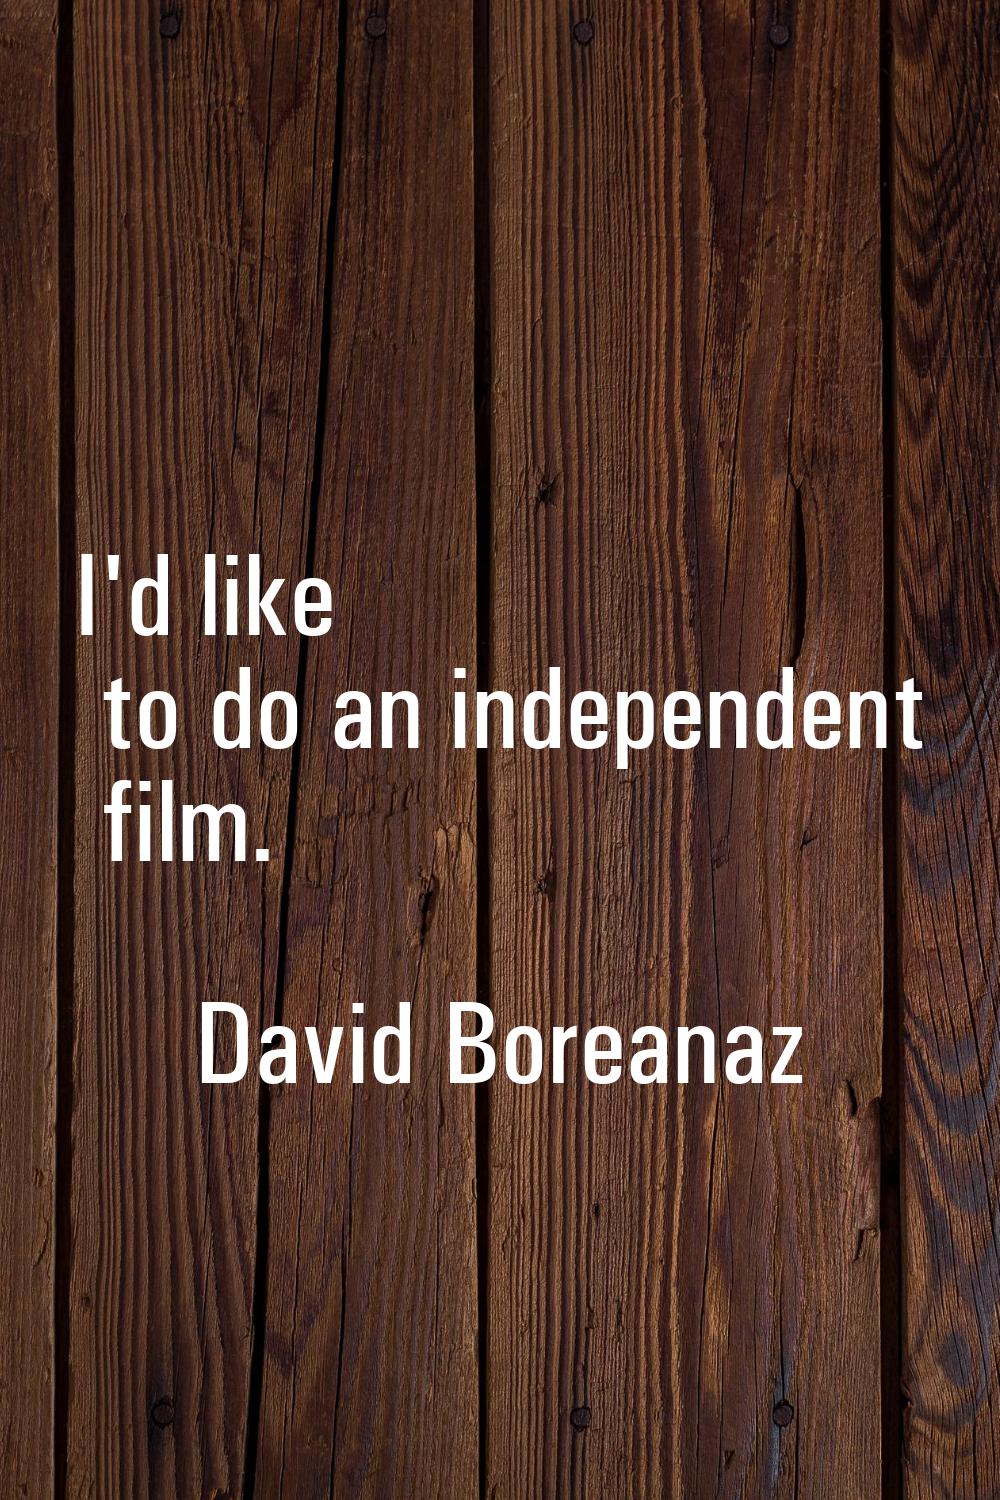 I'd like to do an independent film.